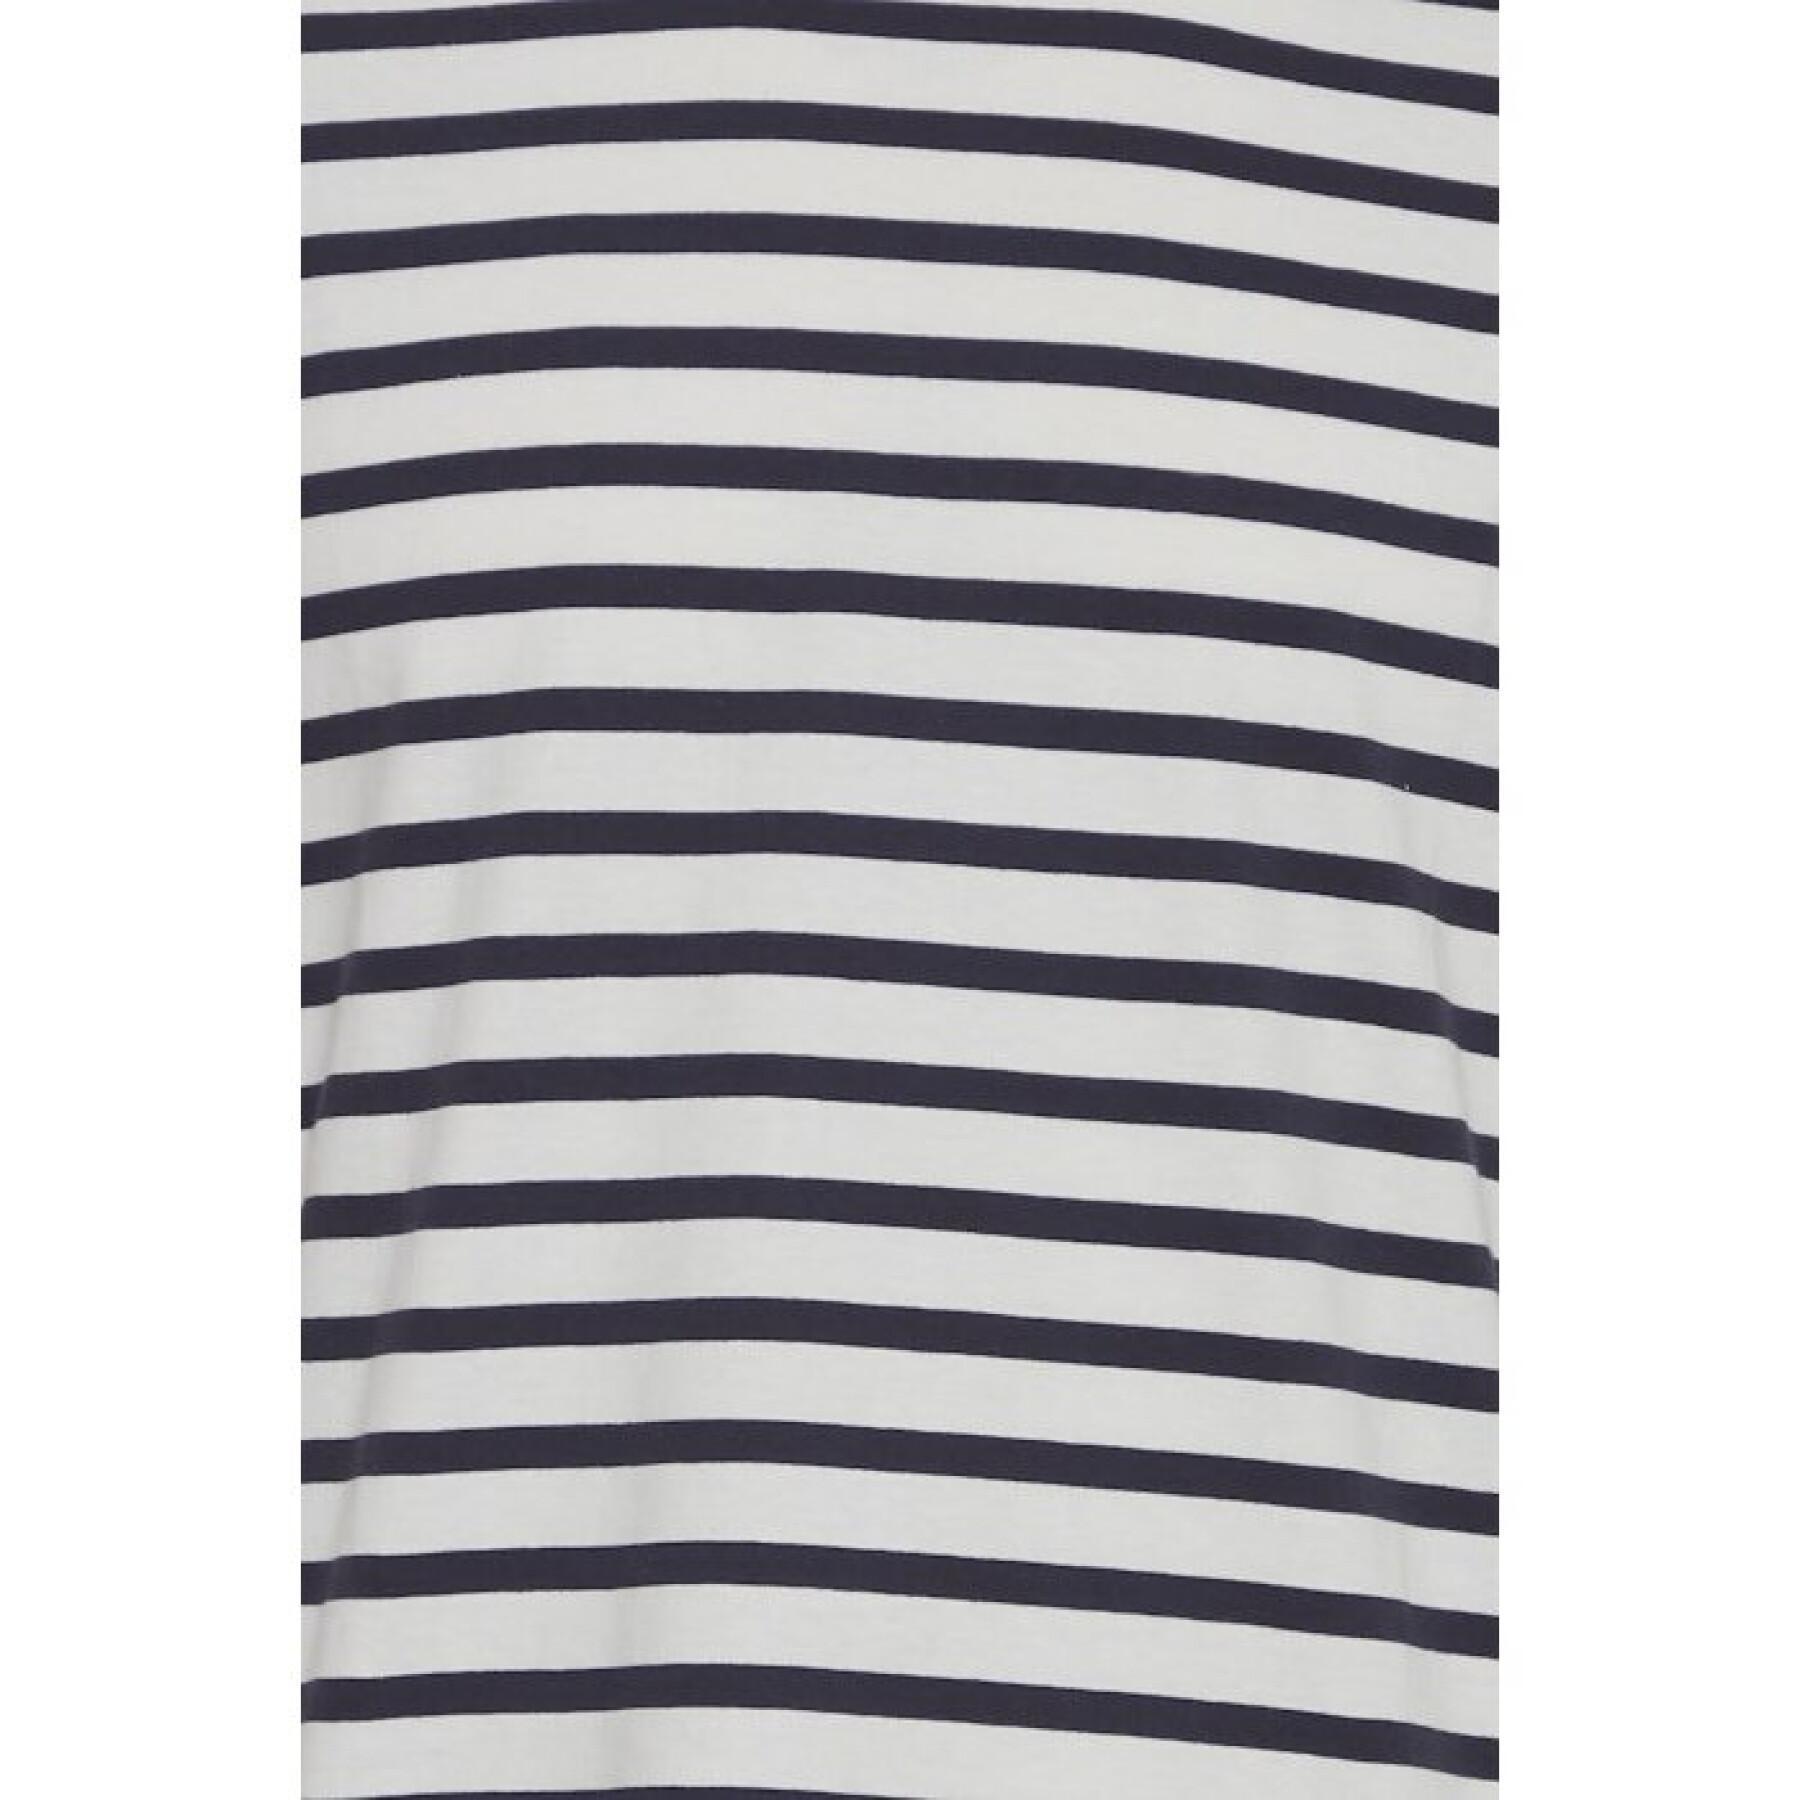 Structured striped T-shirt Casual Friday Tue 0063